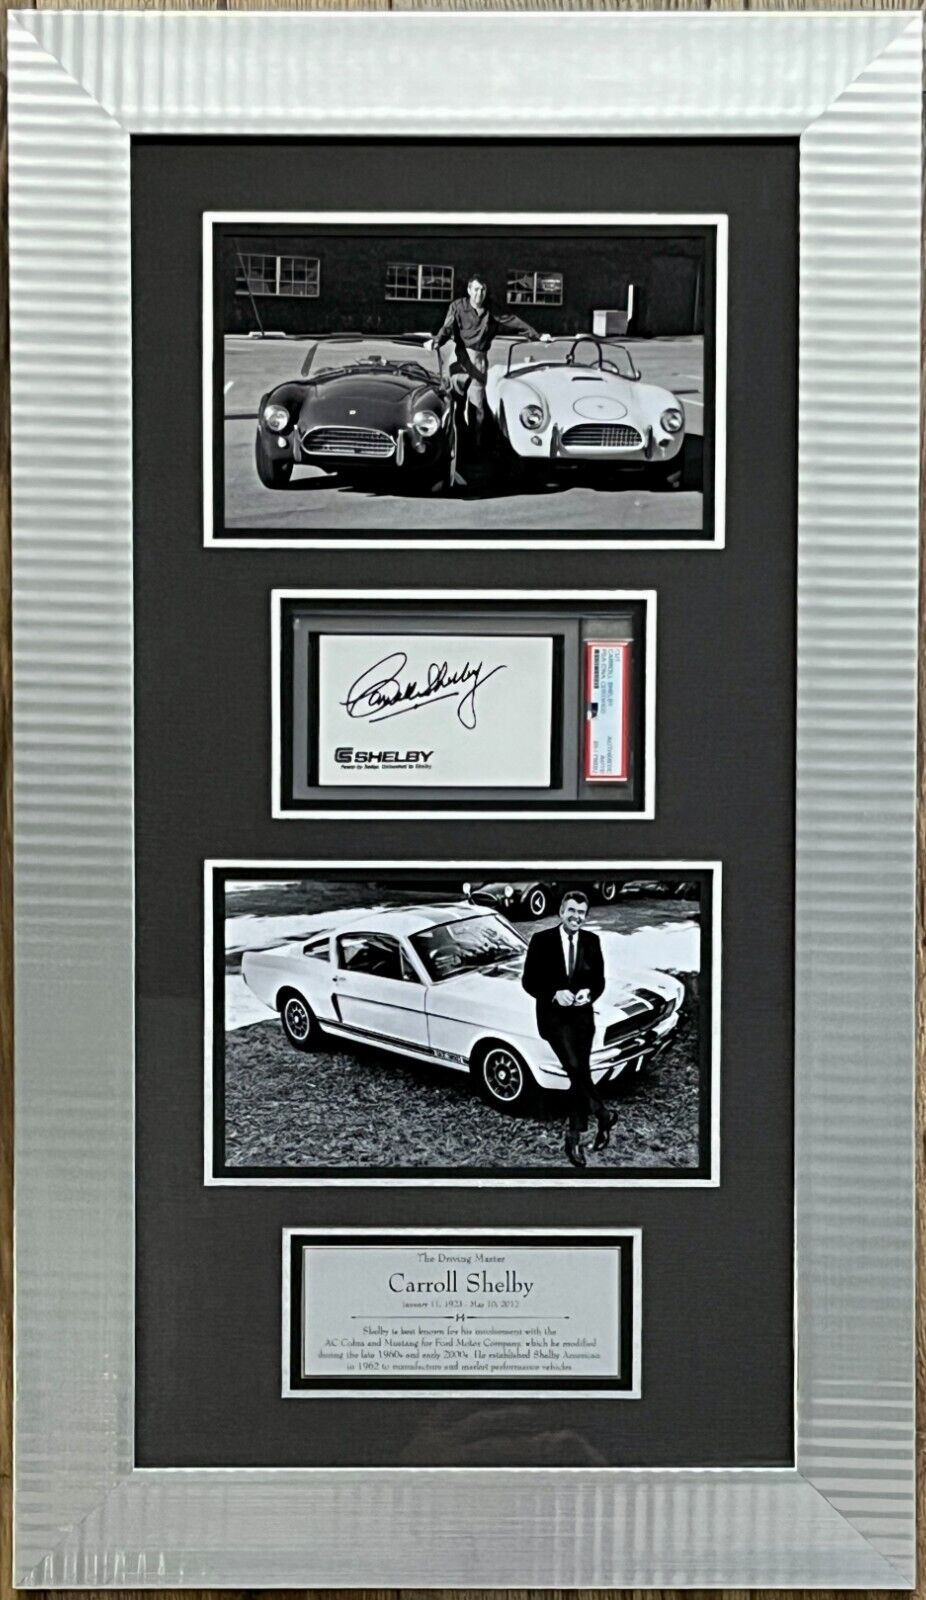 Carroll Shelby d.2012 (Shelby Charger/Mustang) signed custom framed display-PSA